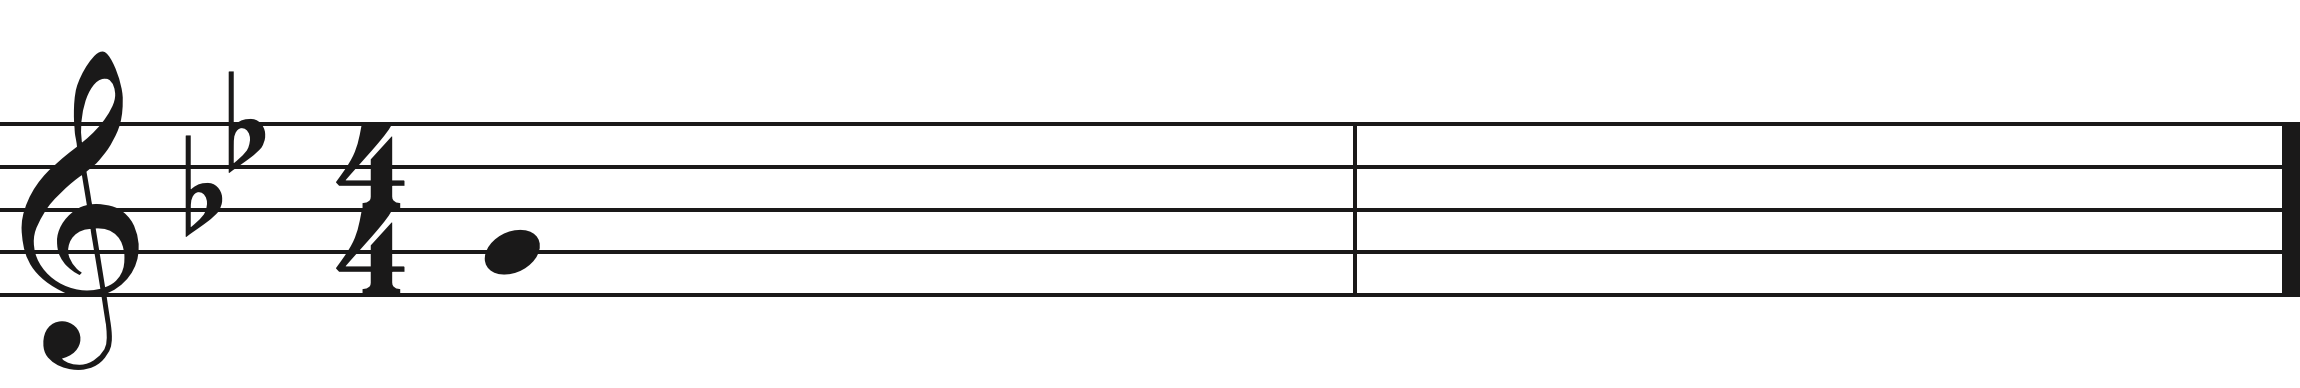 Melodic Sequences Aural Training exercise example2